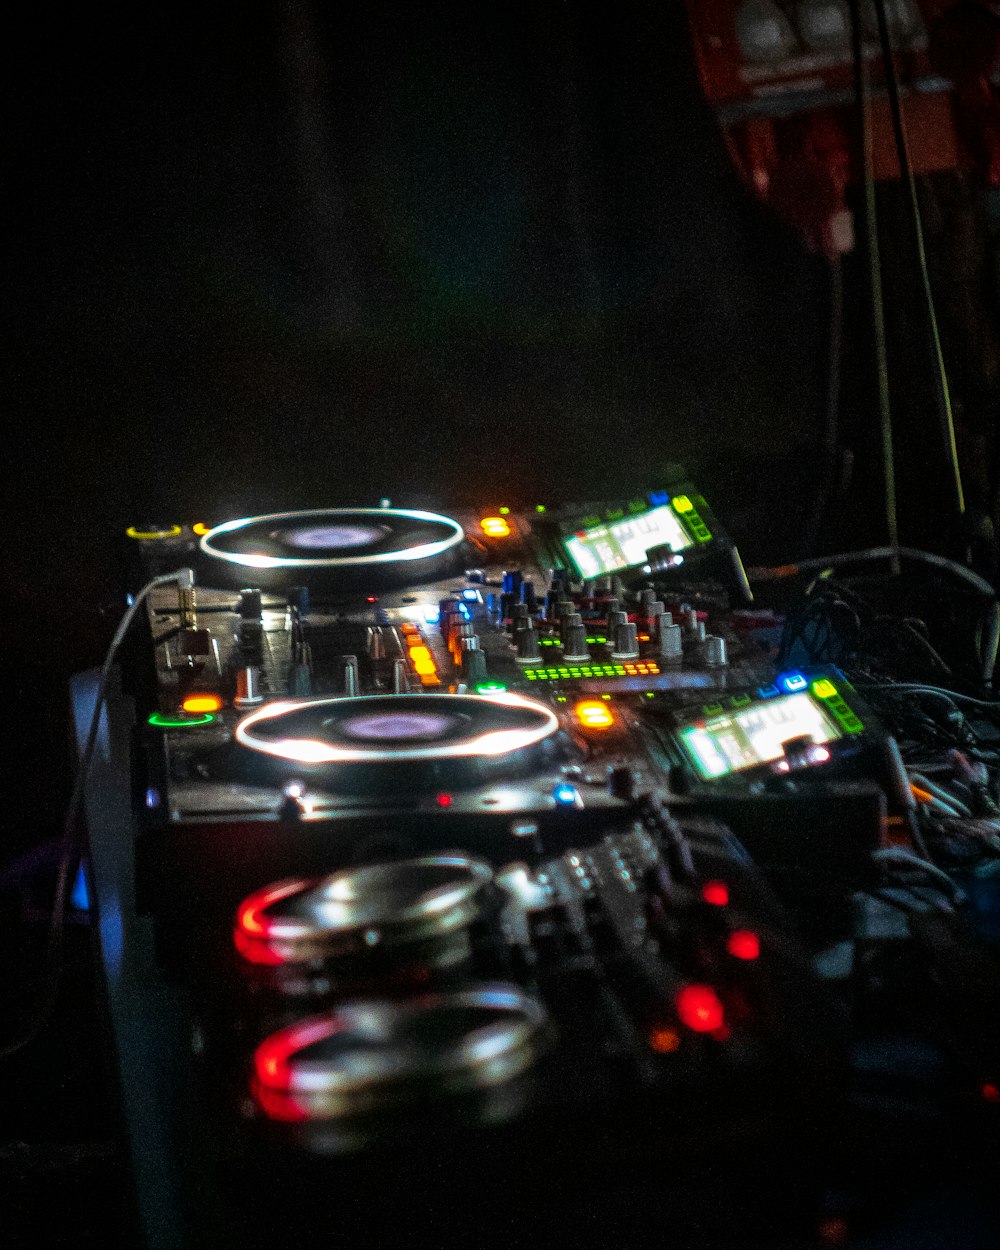 a dj's turntable in a dark room